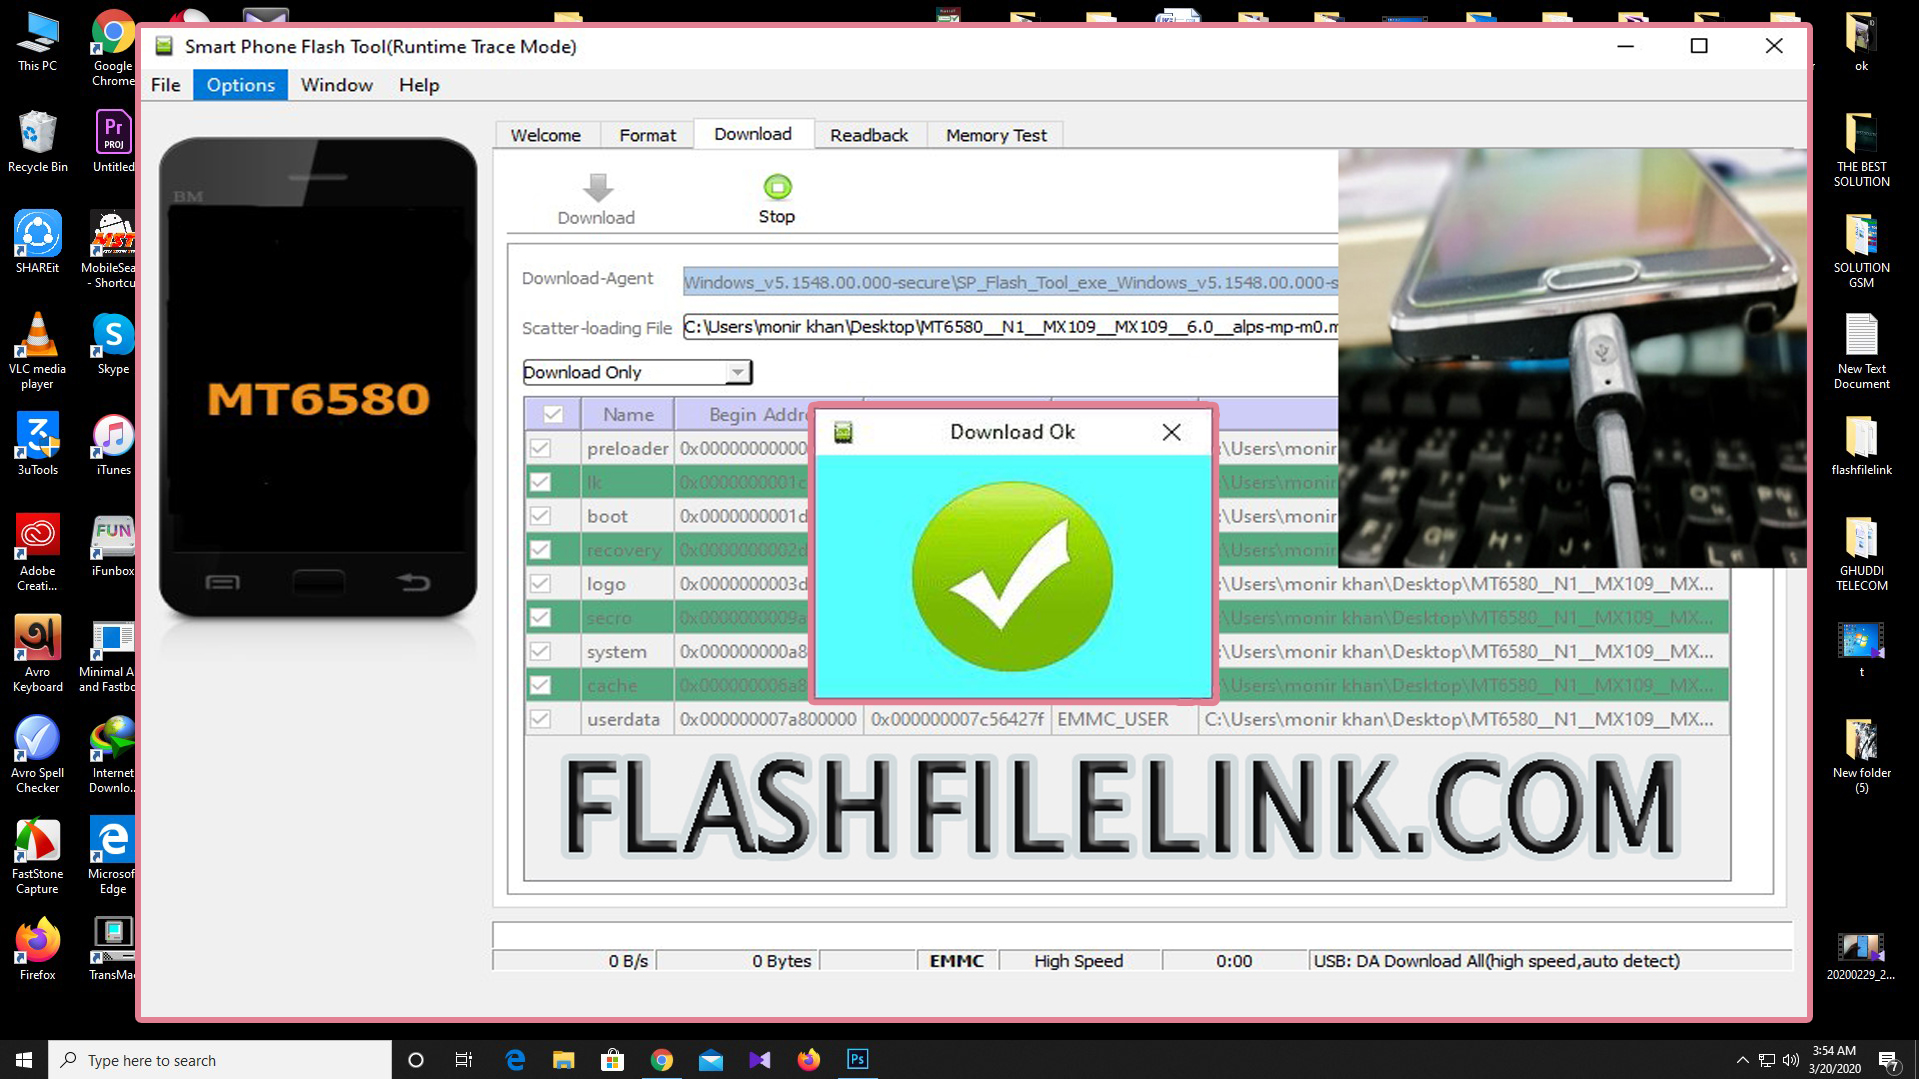 HOW TO FLASH YOUR SMARTPHONE BY TUTORIAL SP FLASH TOOL